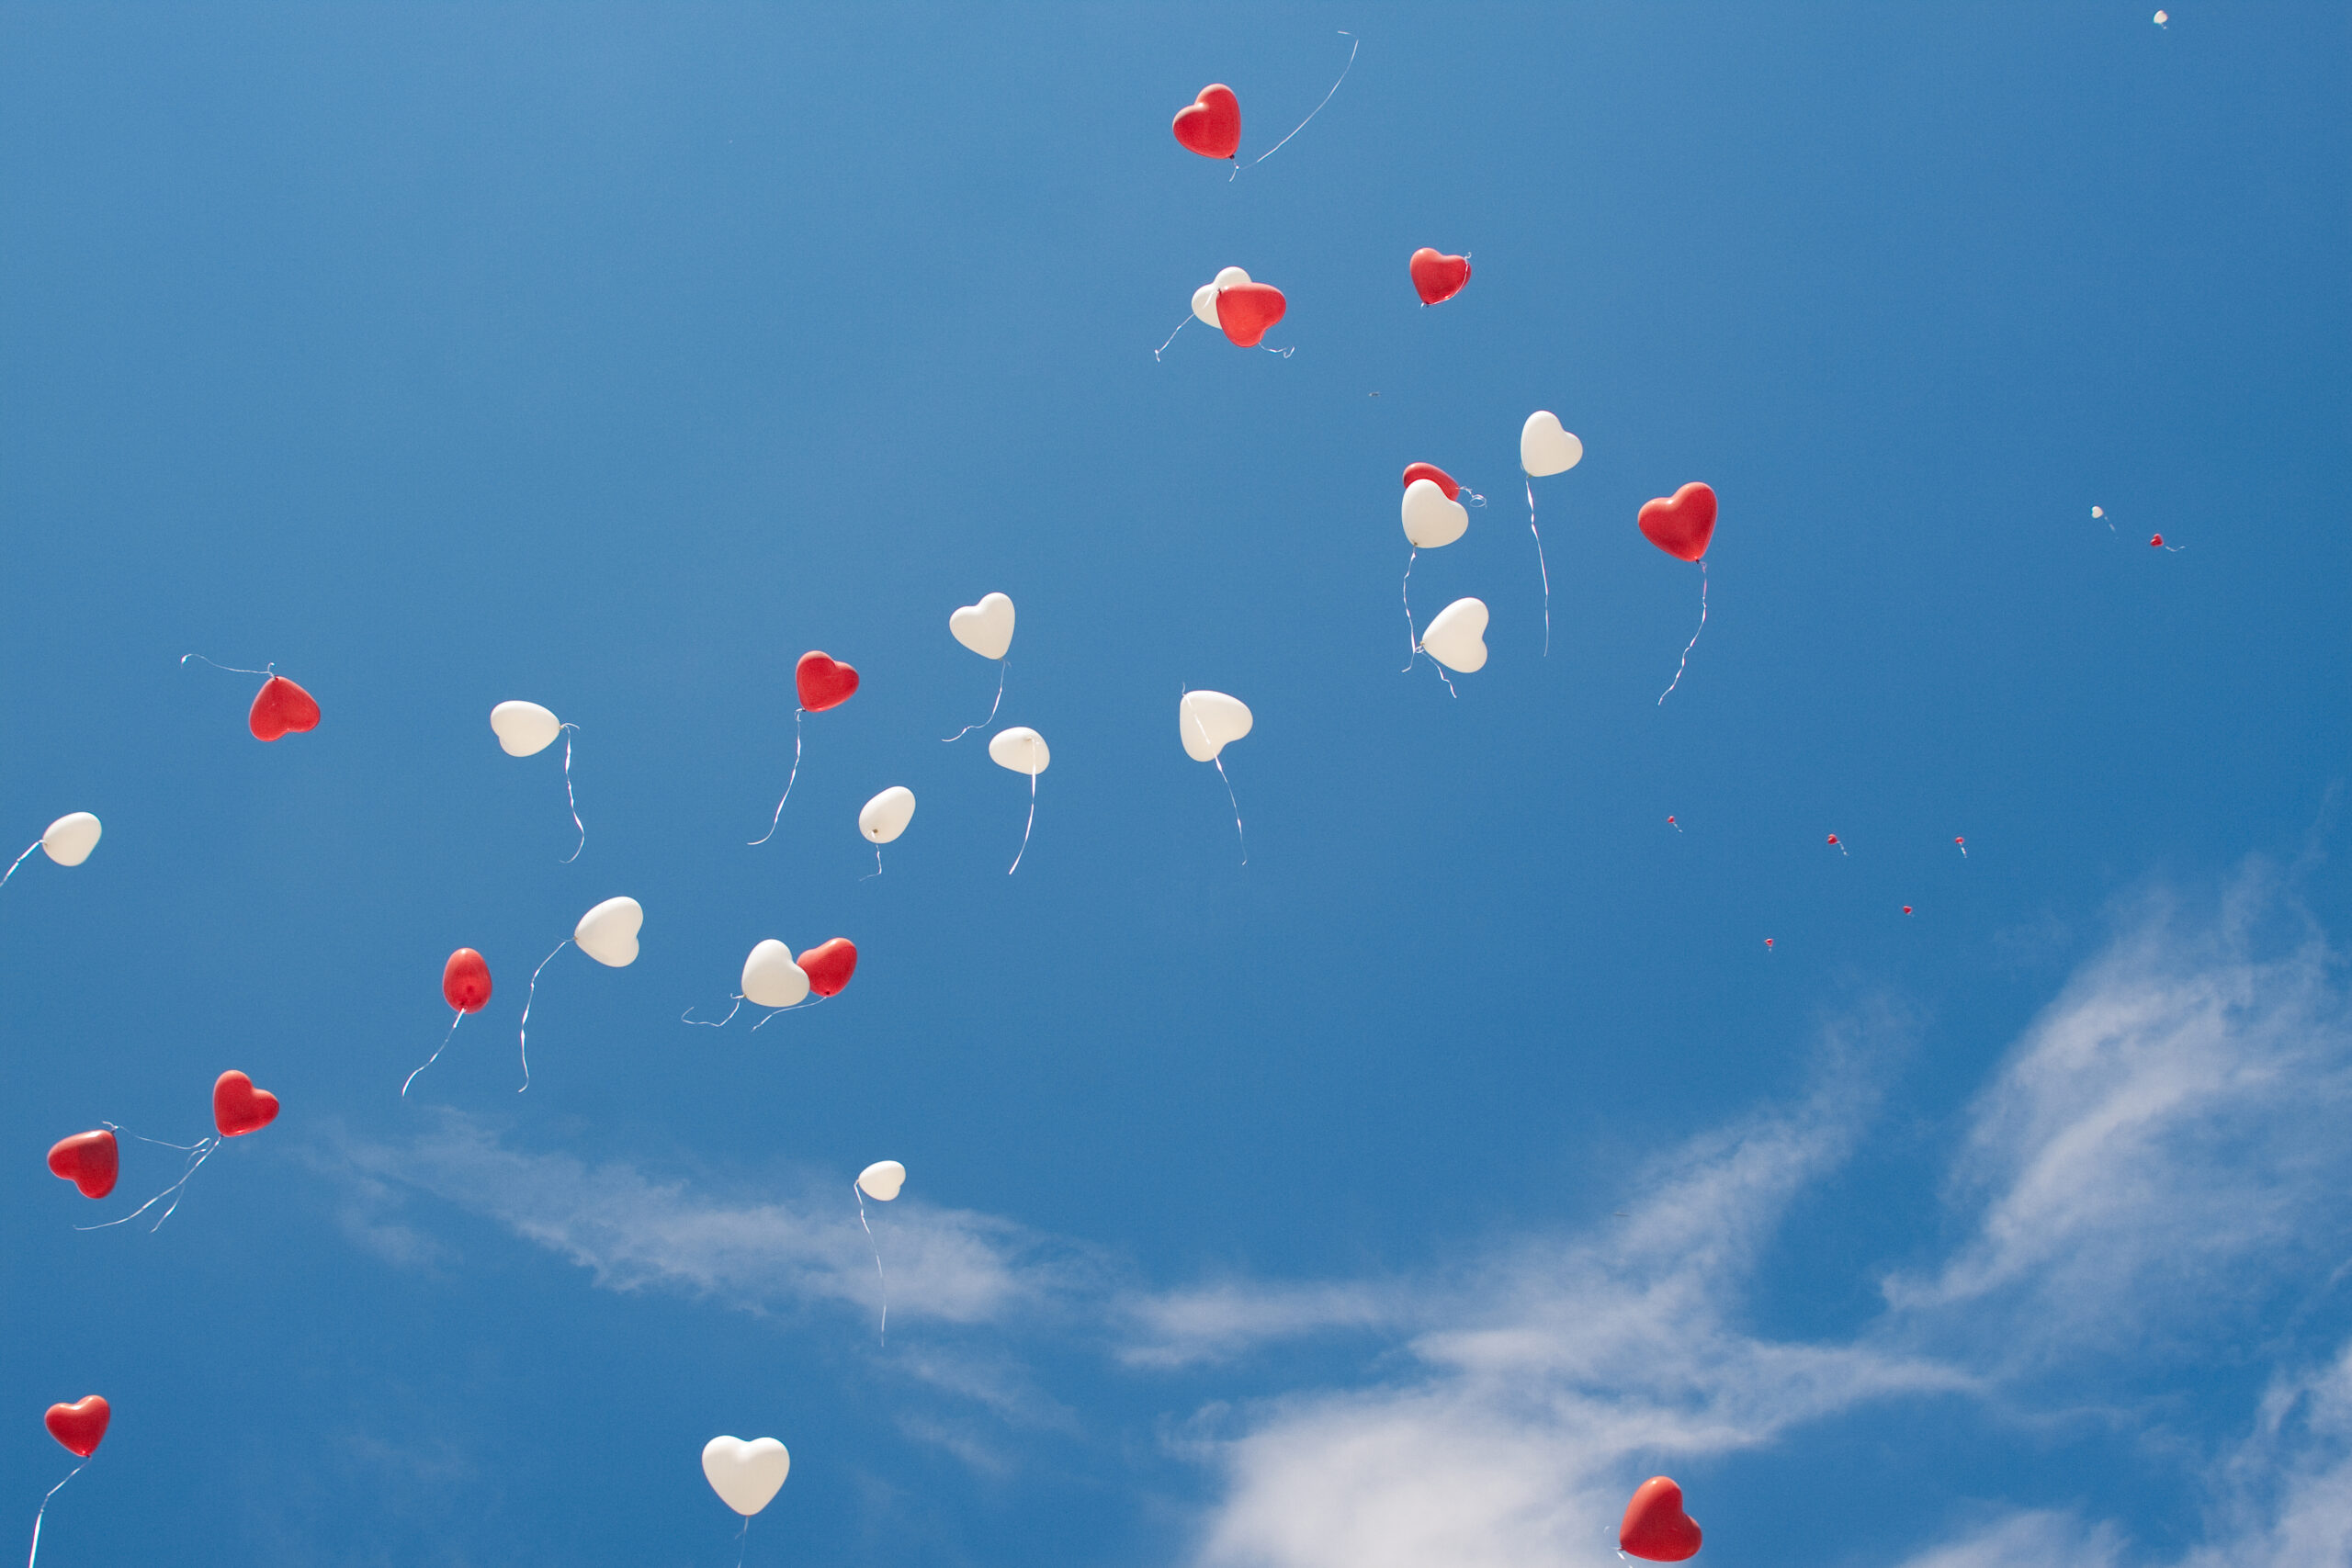 Red and white heart balloons released into blue sky which can become hazardous.